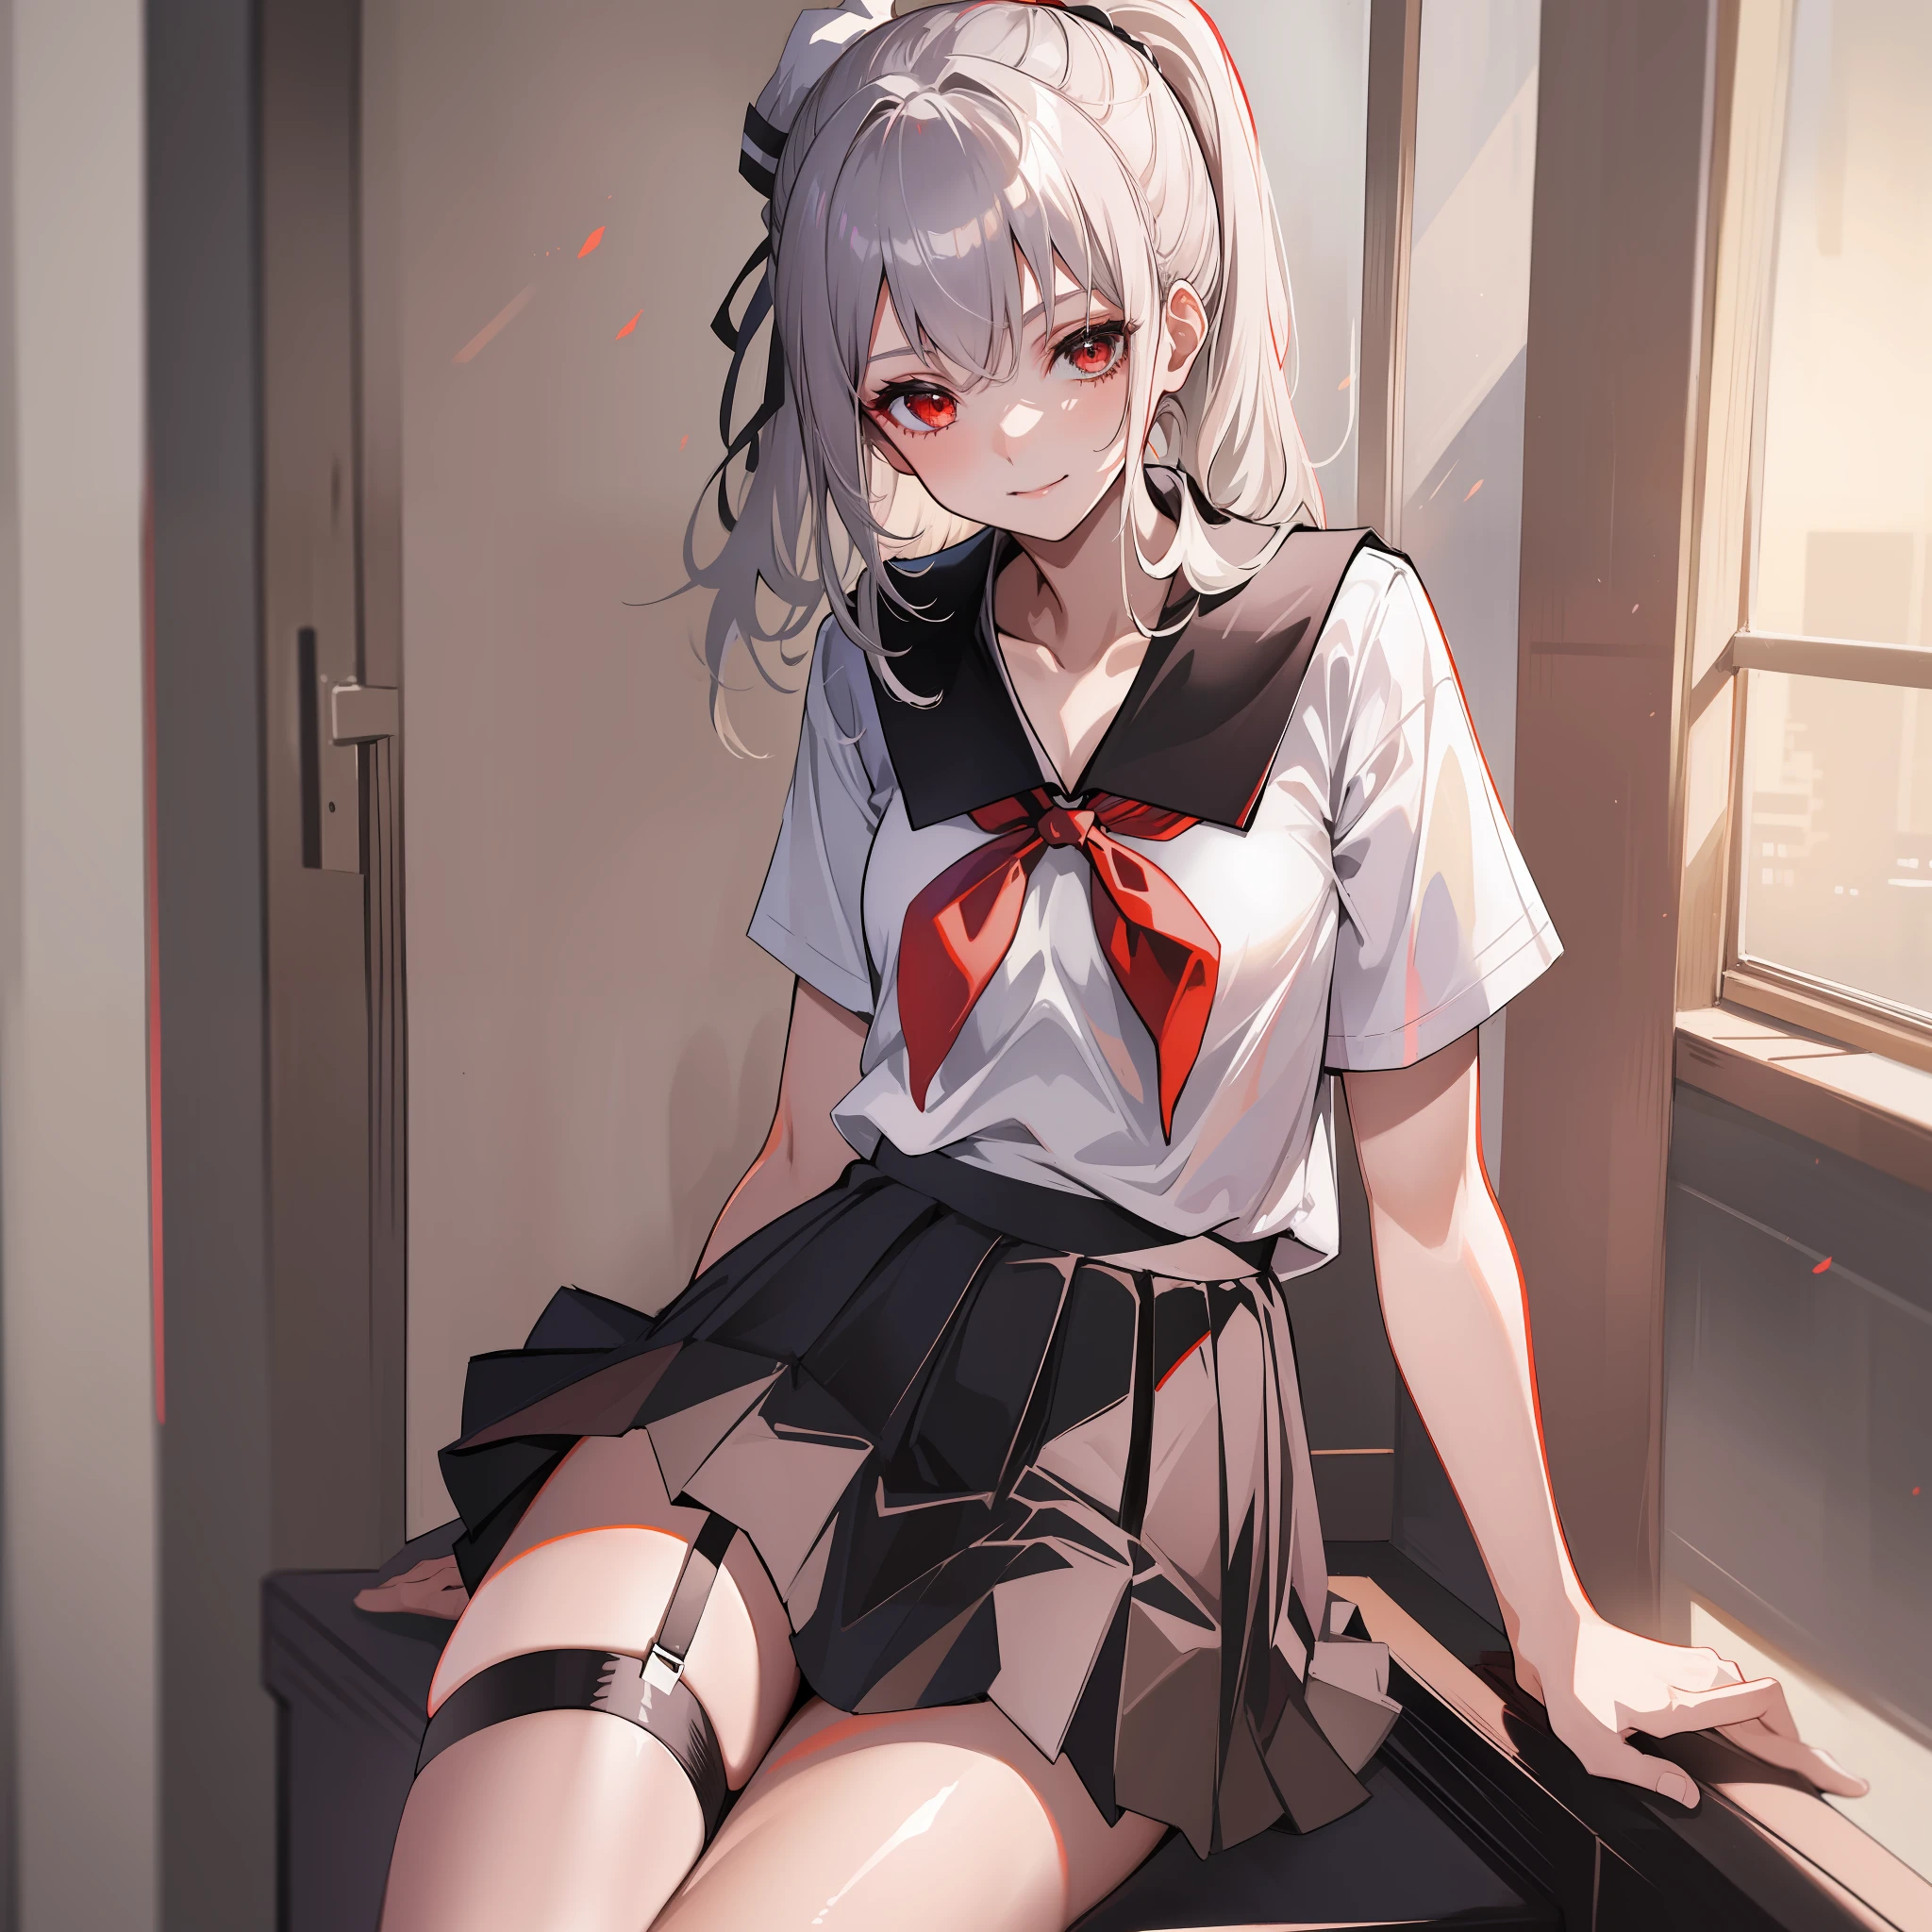 (name), ((highest quality)), (super detail), 1 girl, silver hair, ponytail, school, classroom, open legs, skirt between the crotches, red panties, brown eyes, 15 years old, garter belt, , skirt, socks, seraphku, neckerchief, sailor collar, pleated skirt, white socks, black skirt, short sleeves, shirt, white shirt, Black sailor color, blue neckerchief, evil smile, bangs, small breasts, cleavage, perfect hands, hand detail, fixed fingers, looking_al_Viewer, top quality, rich detail, perfect image quality,